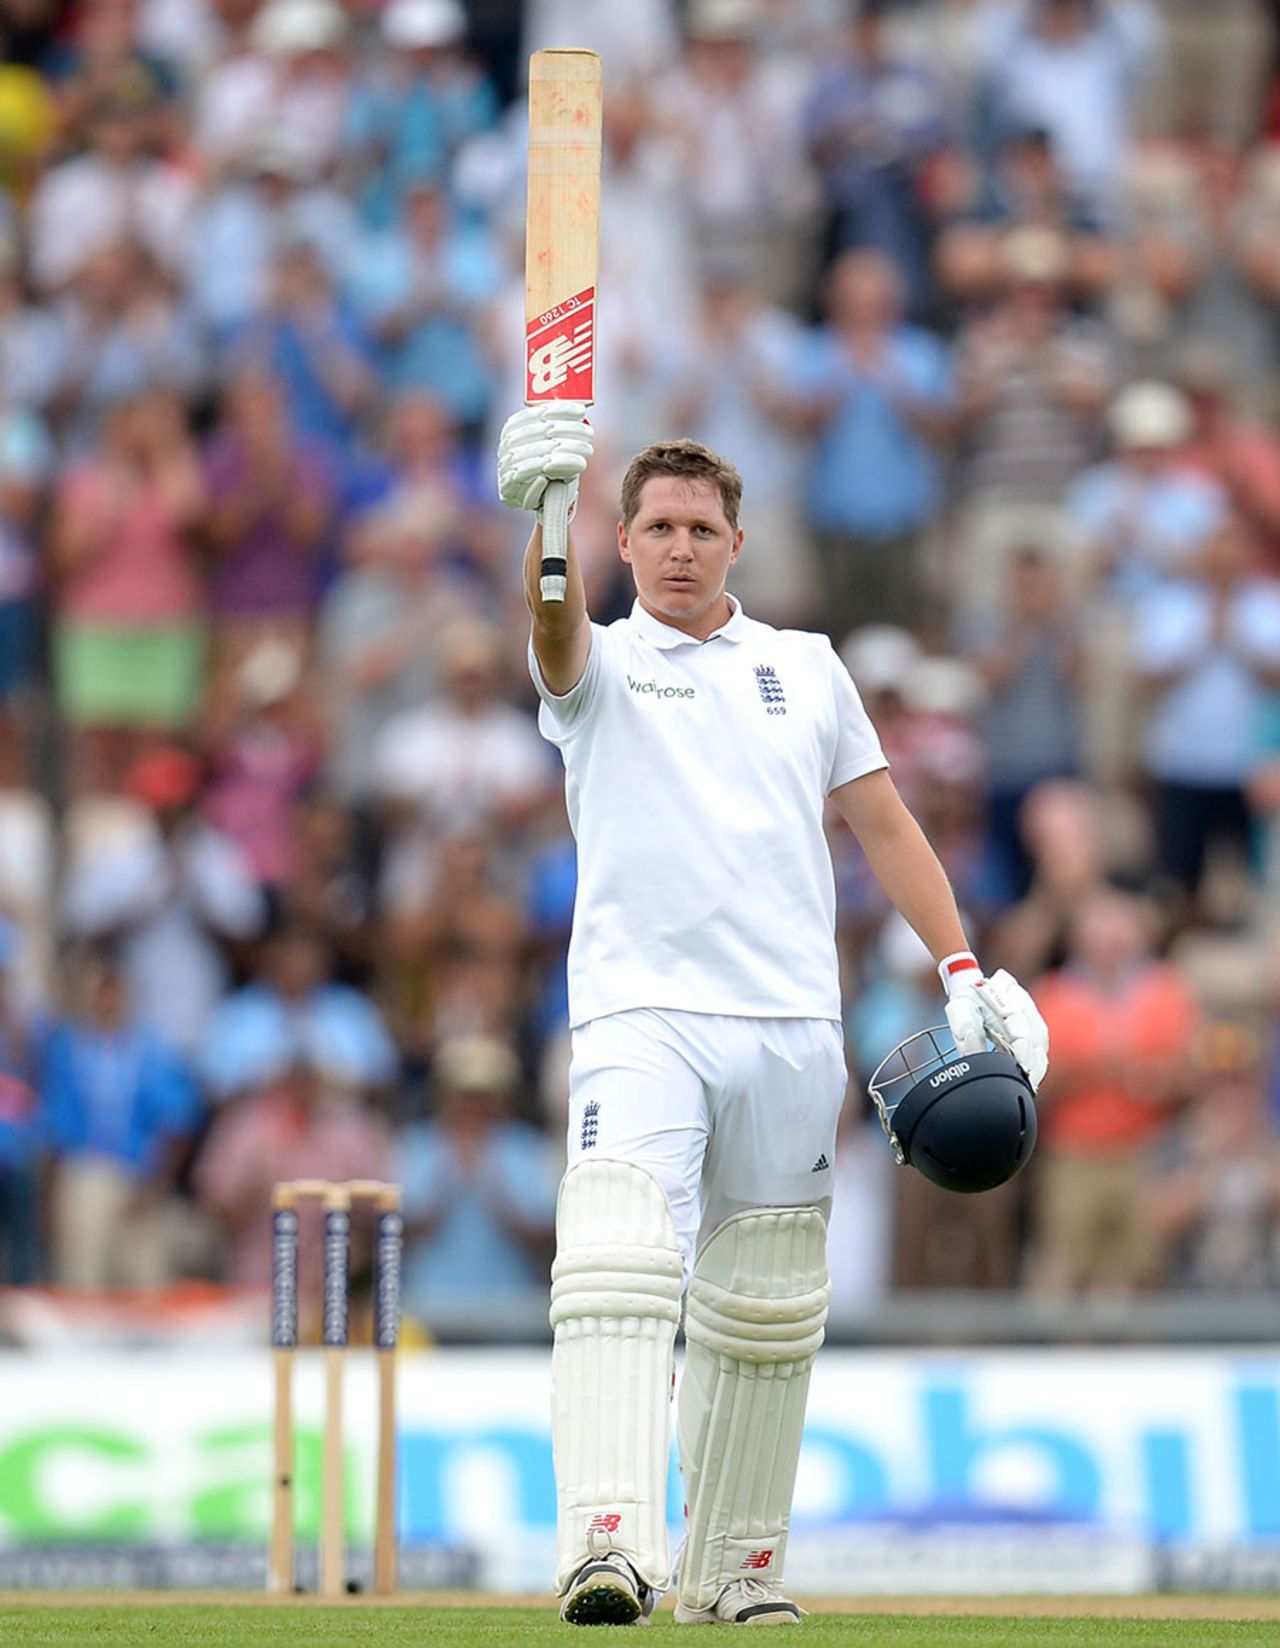 Gary Ballance went through to his third Test century, England v India, 3rd Investec Test, Ageas Bowl, 1st day, July 27, 2014